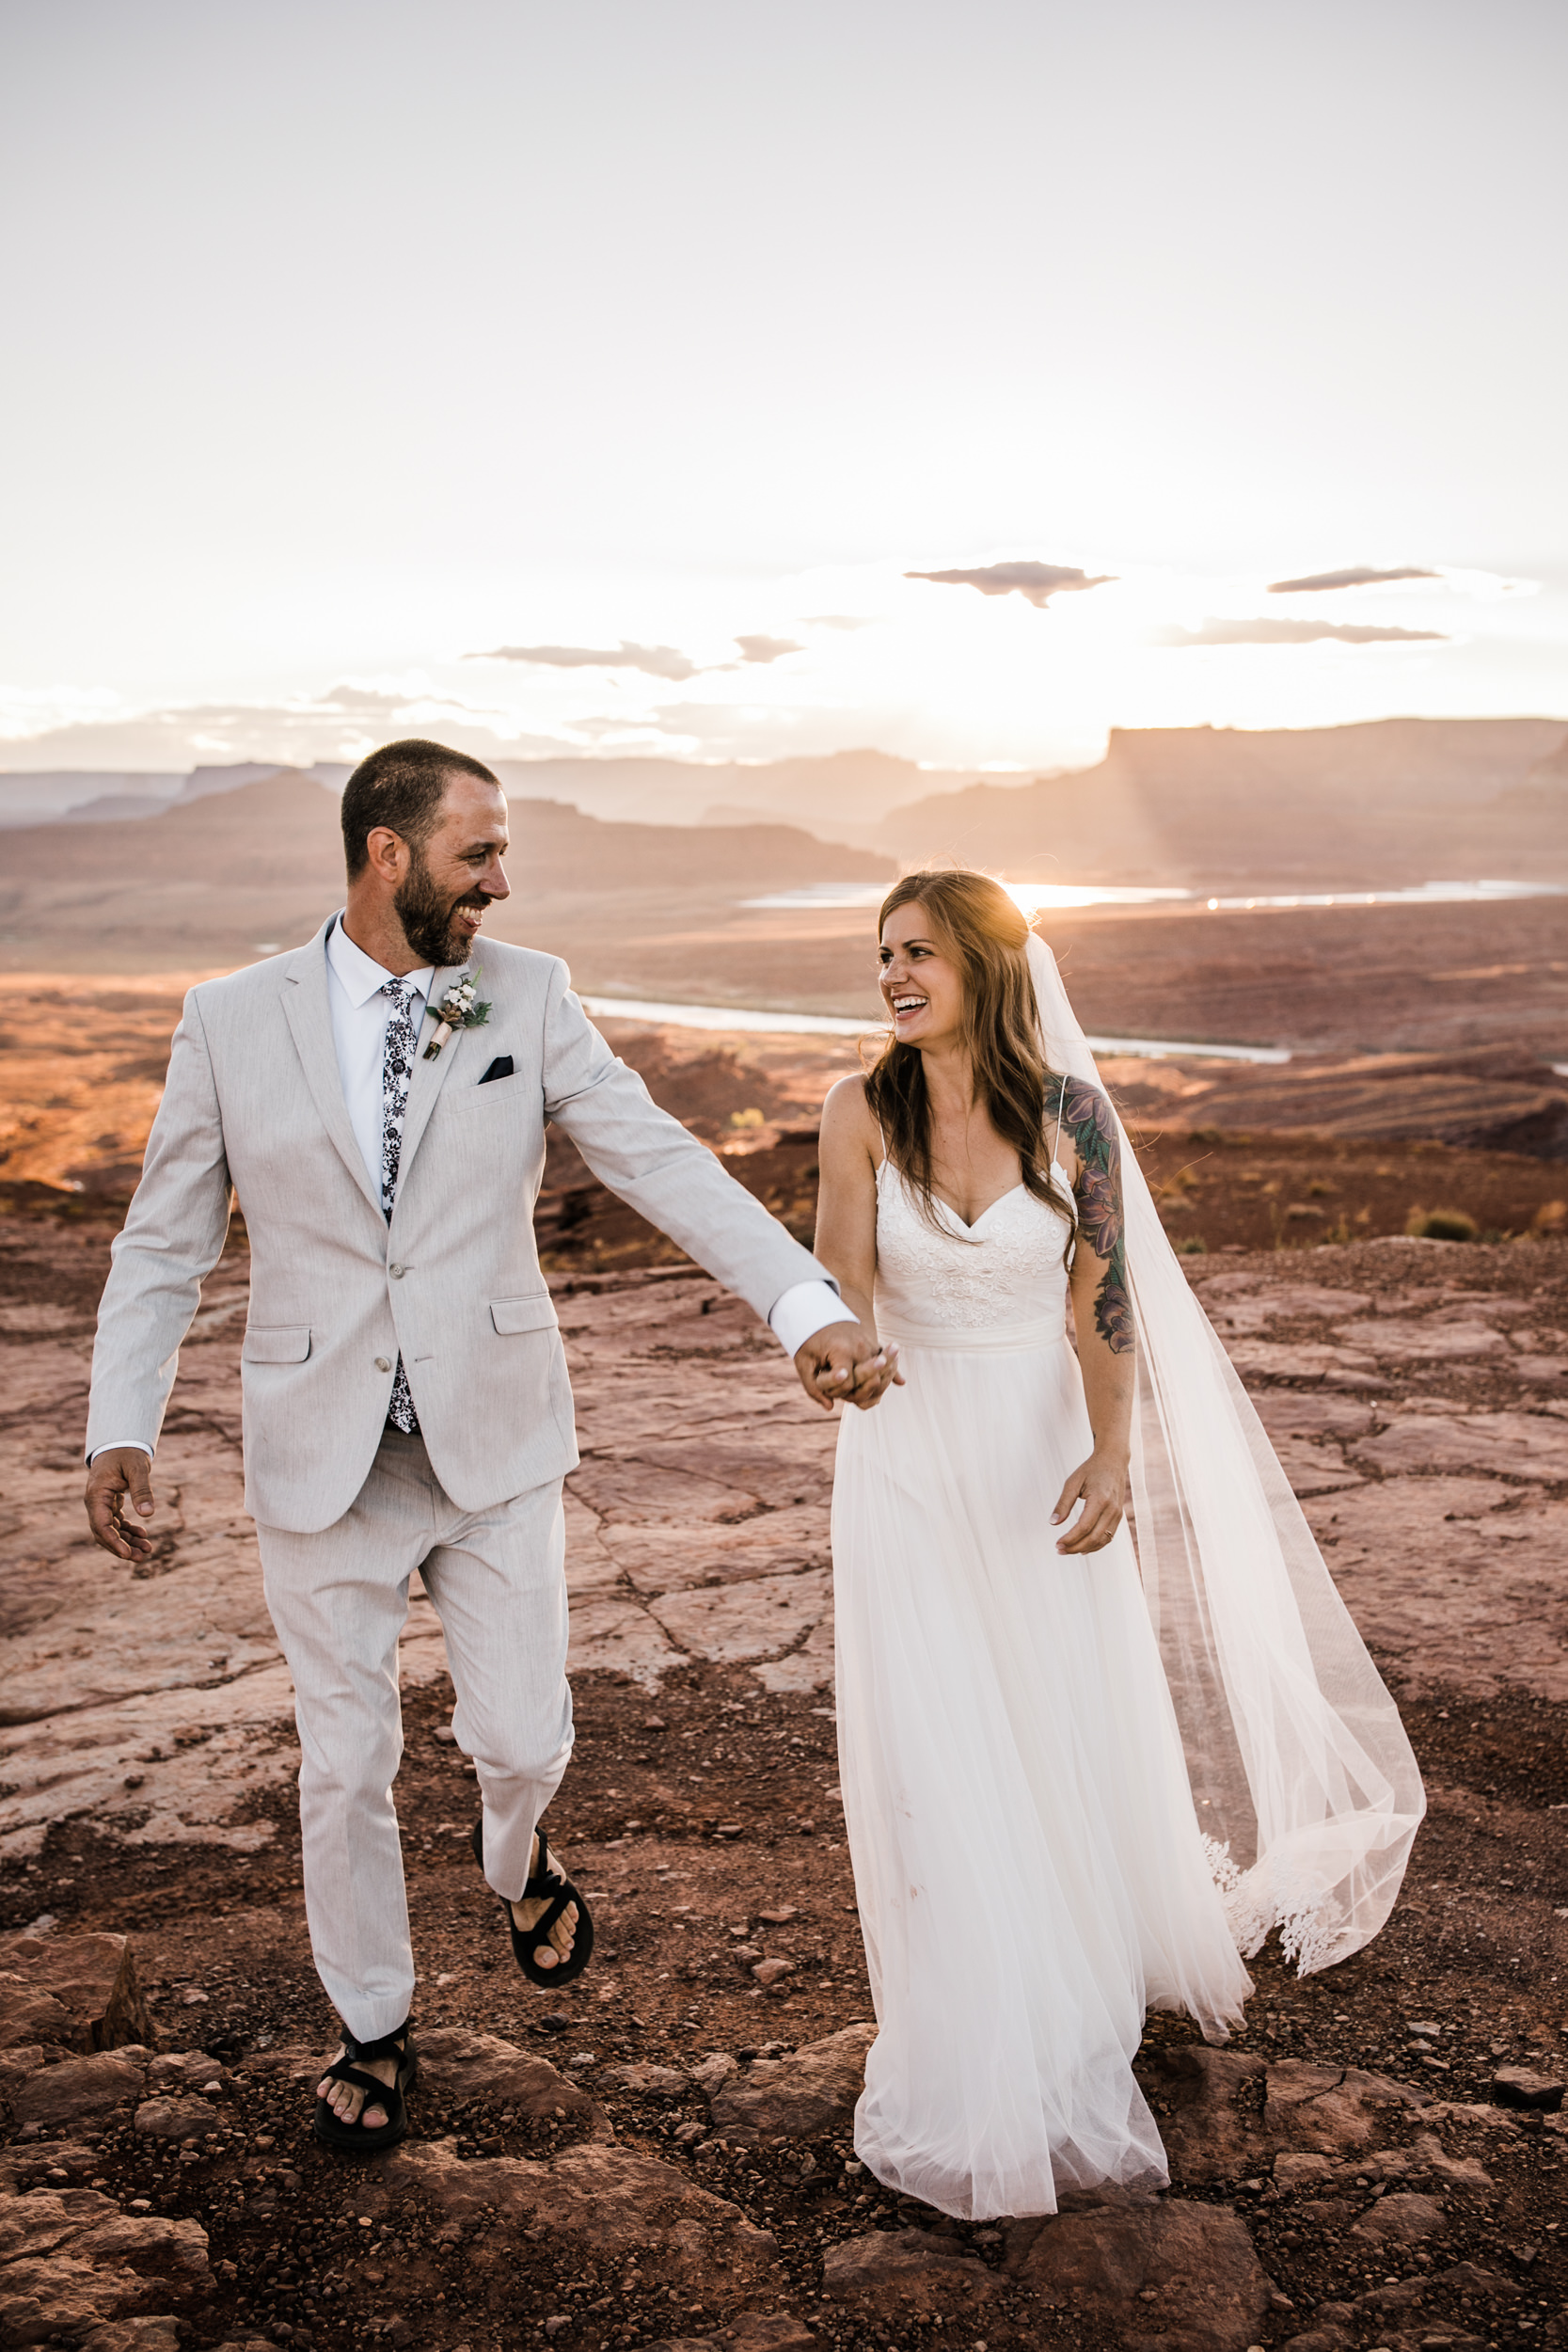 arches national park elopement | rainy wedding day | jeeping wedding in moab utah | the hearnes adventure photography